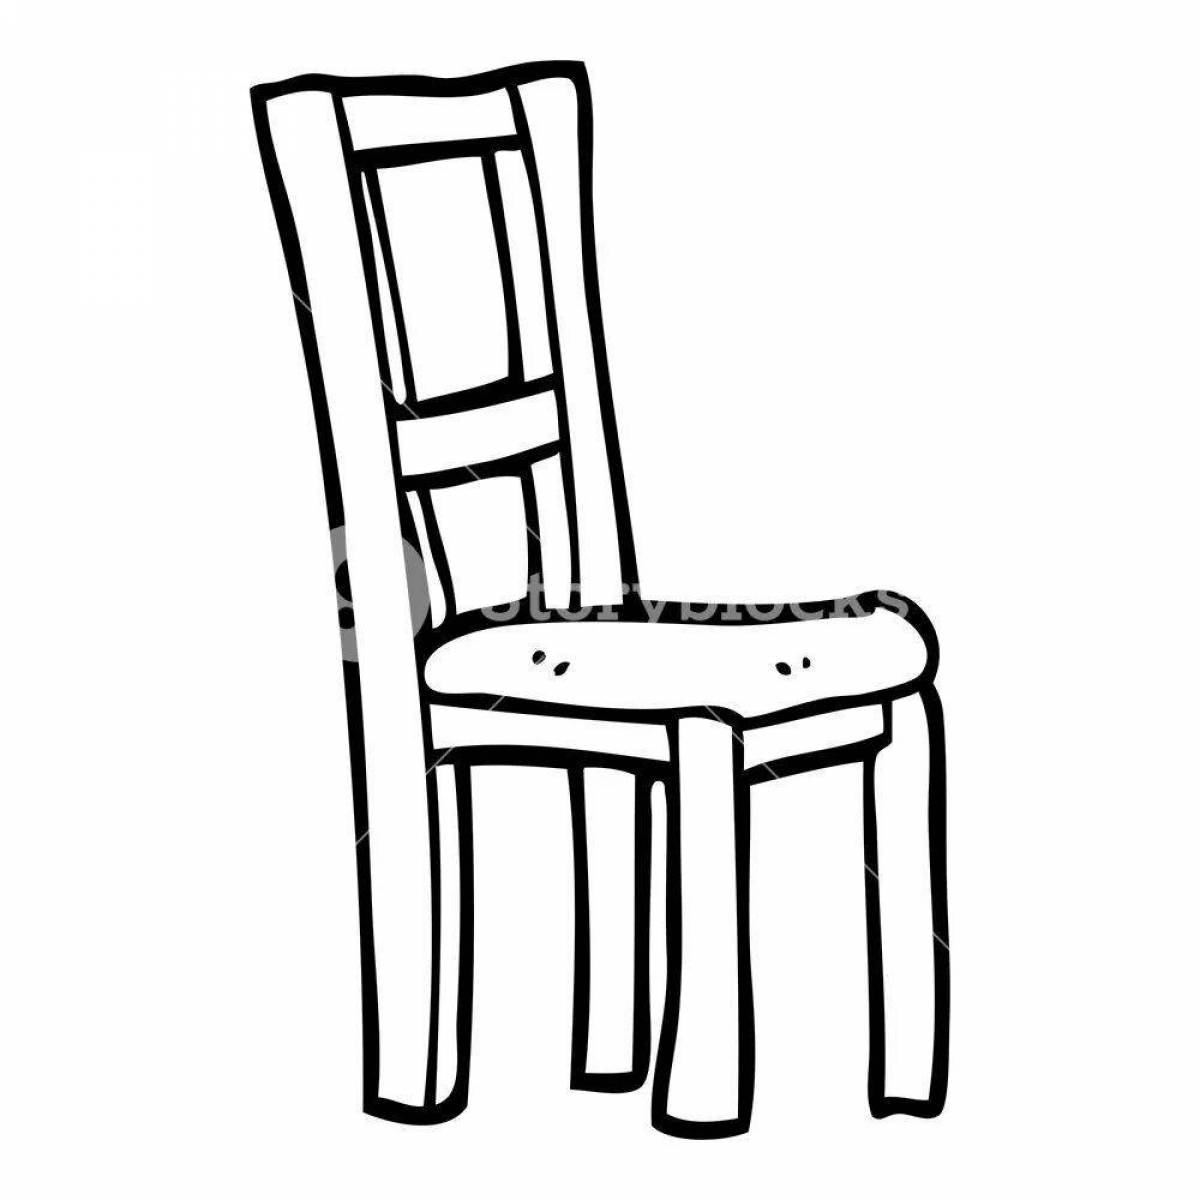 Highchair coloring page